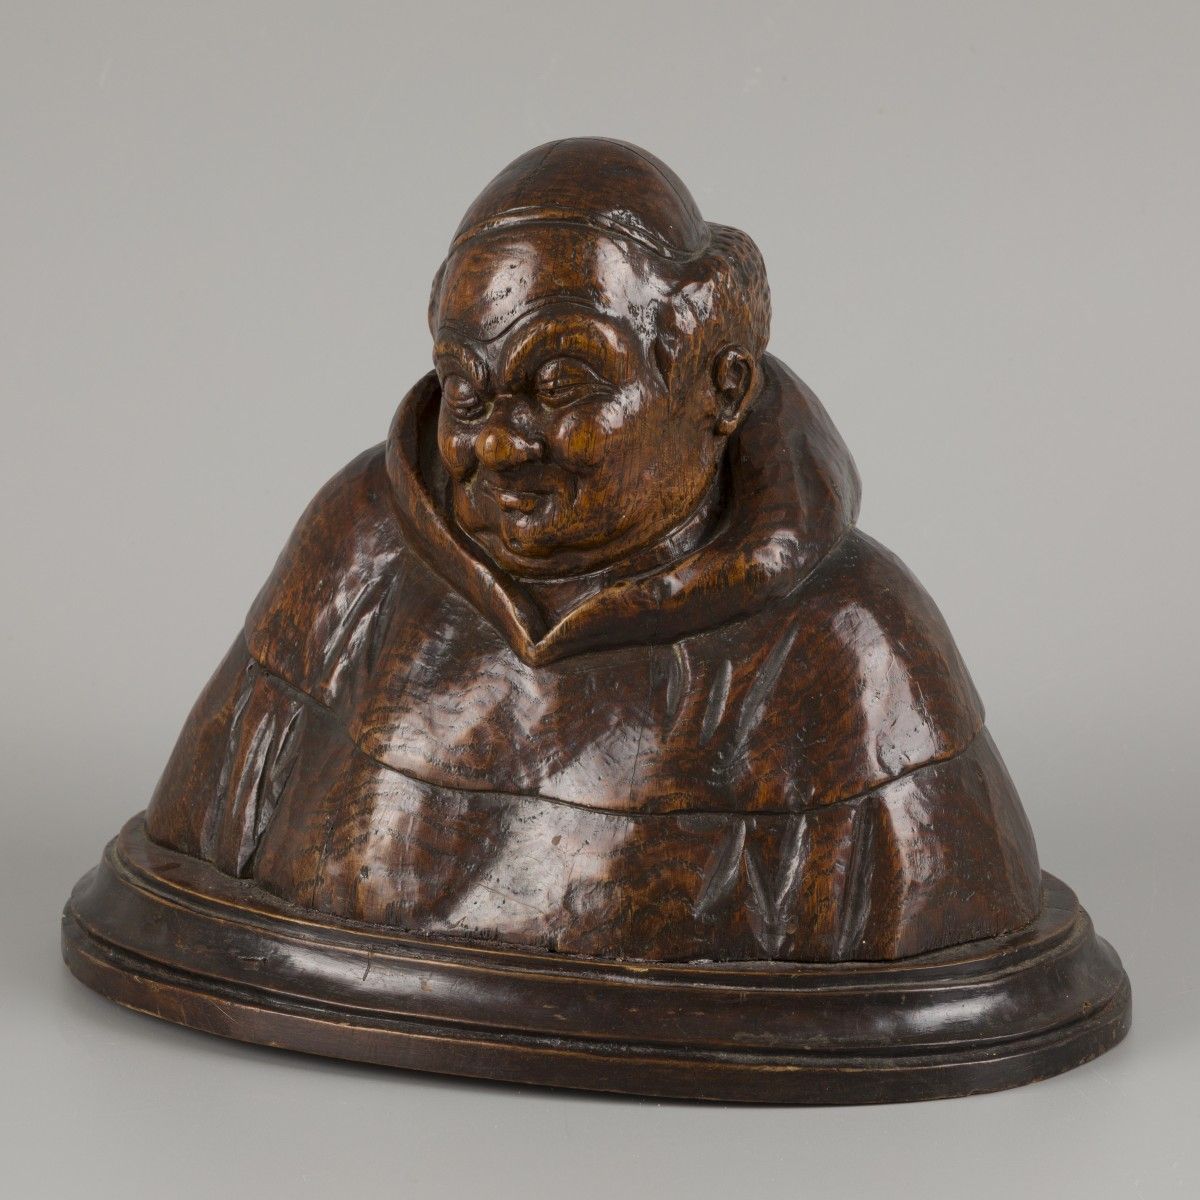 A wooden bust of a happy monk. Signed with "F. Parpan" (verso). H. 28 cm. Estima&hellip;